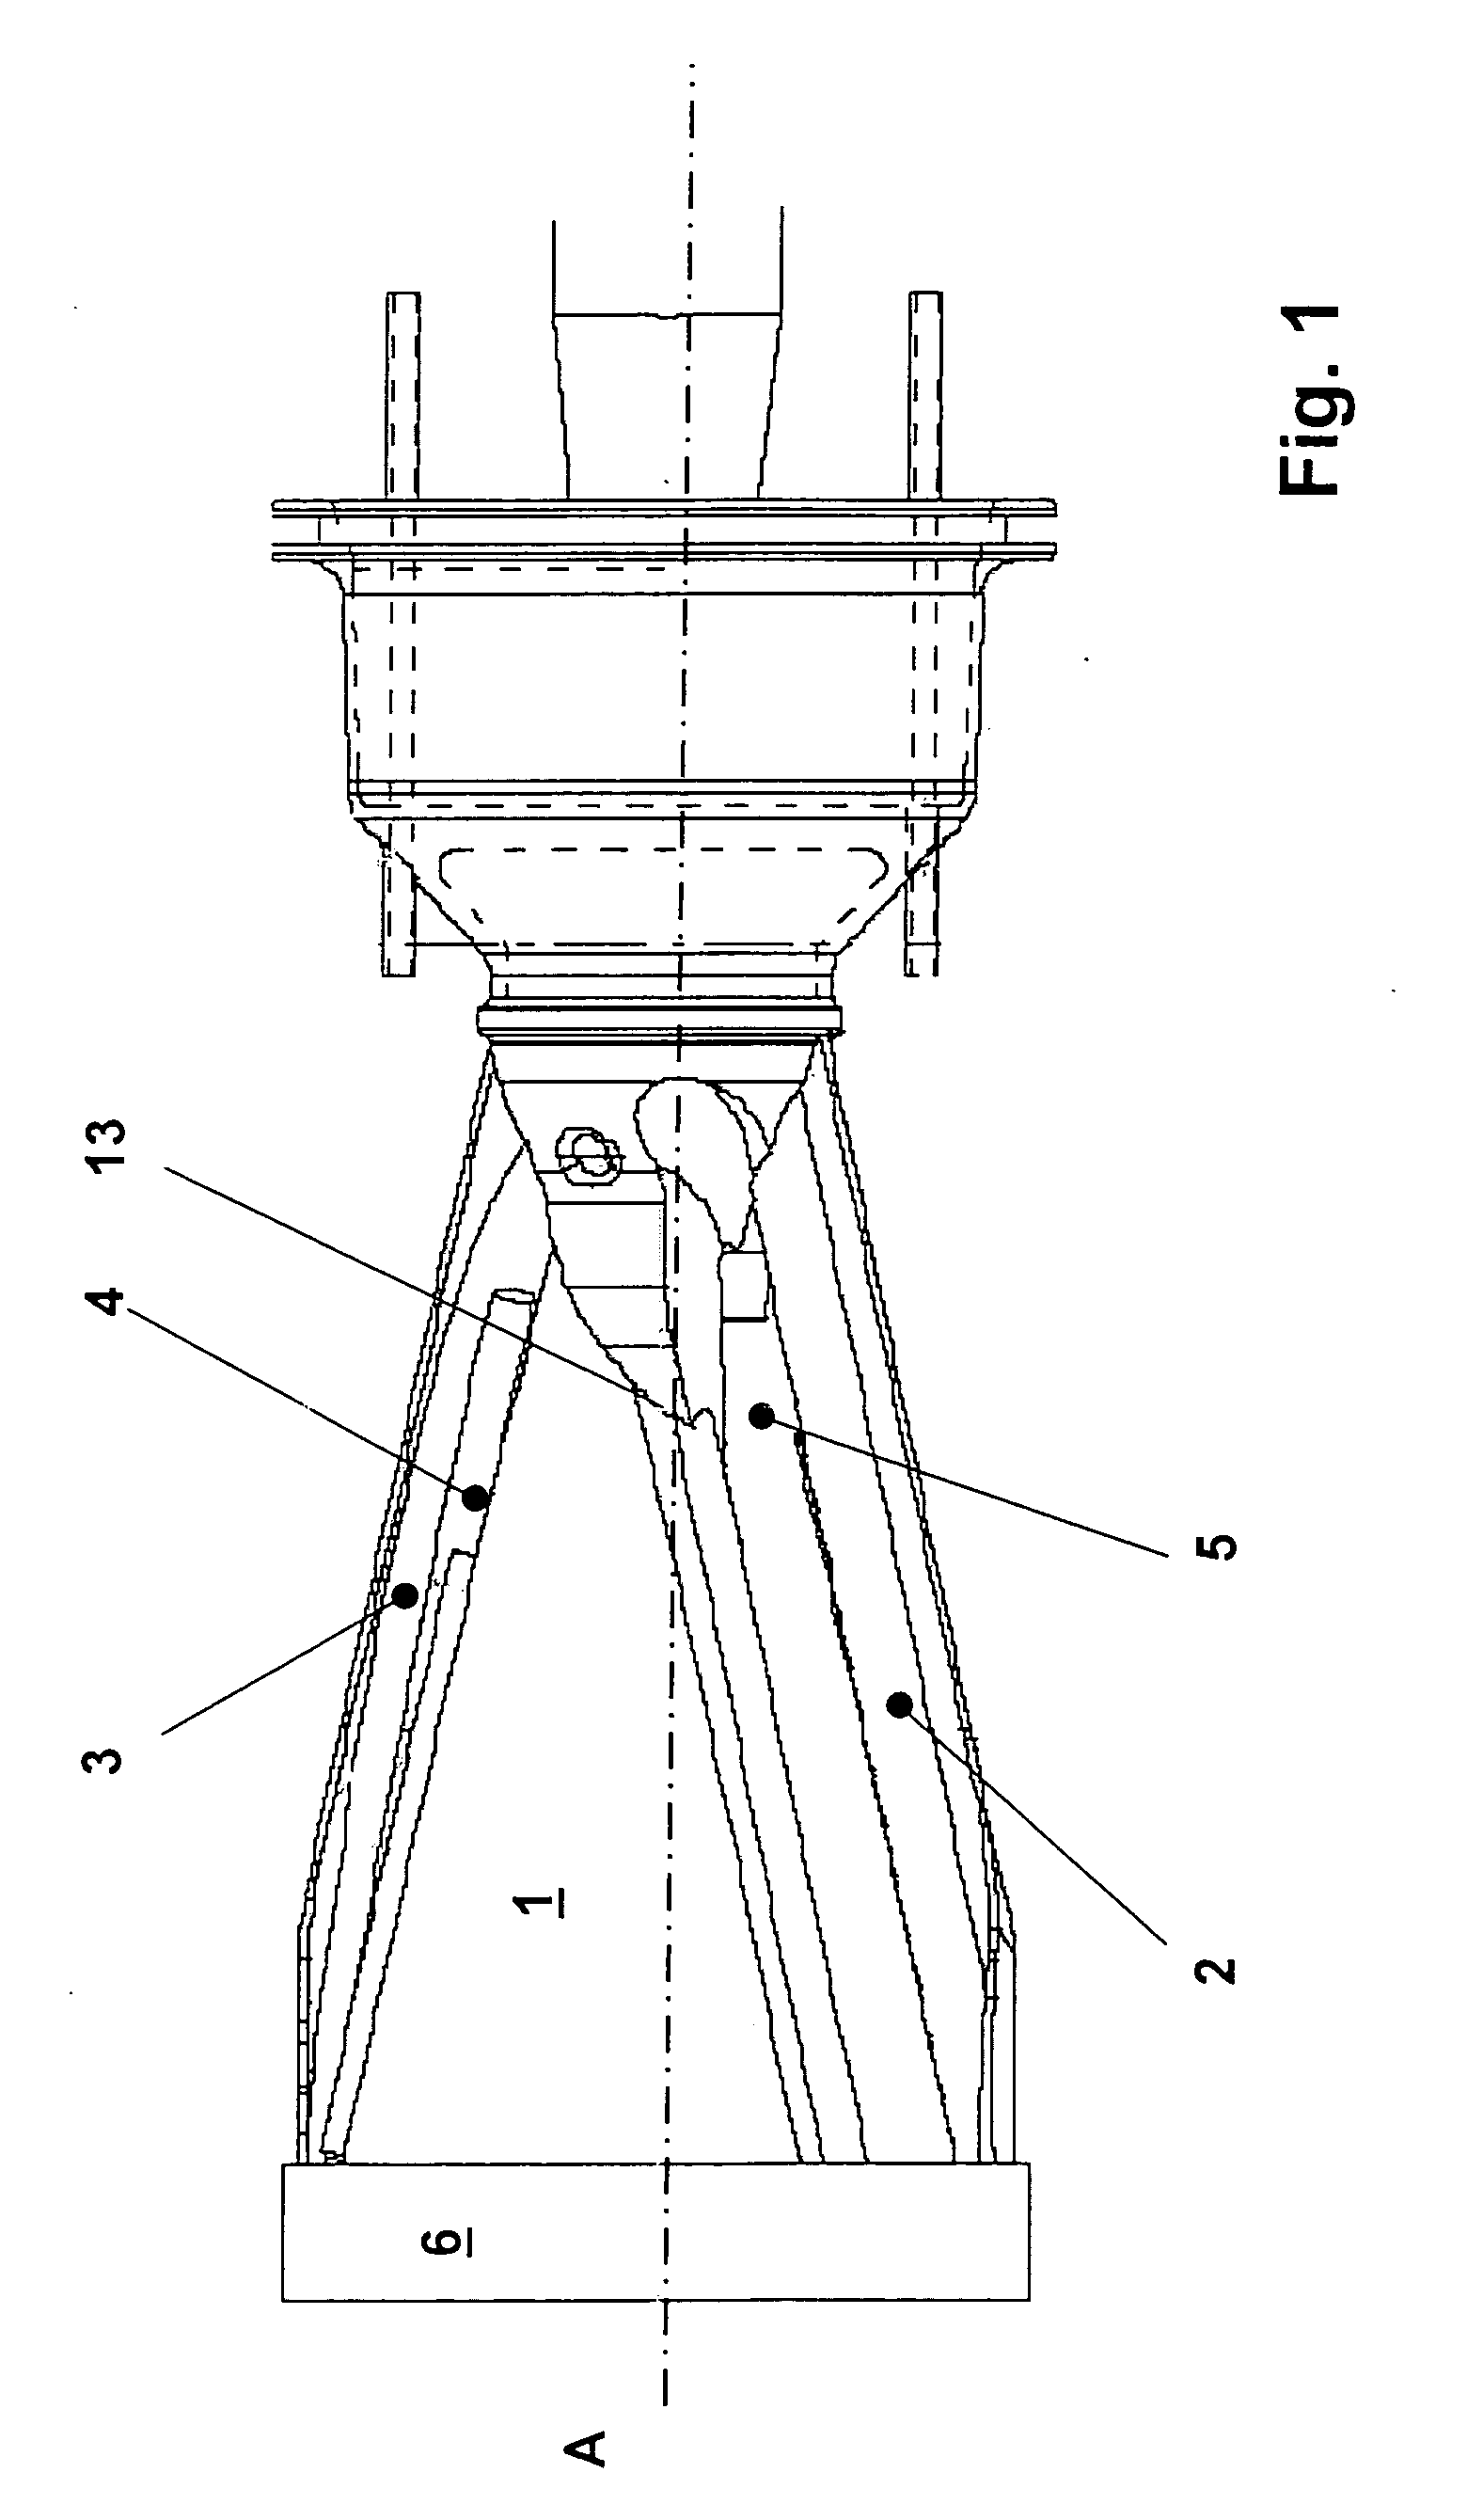 Premix burner with staged liquid fuel supply and also method for operating a premix burner